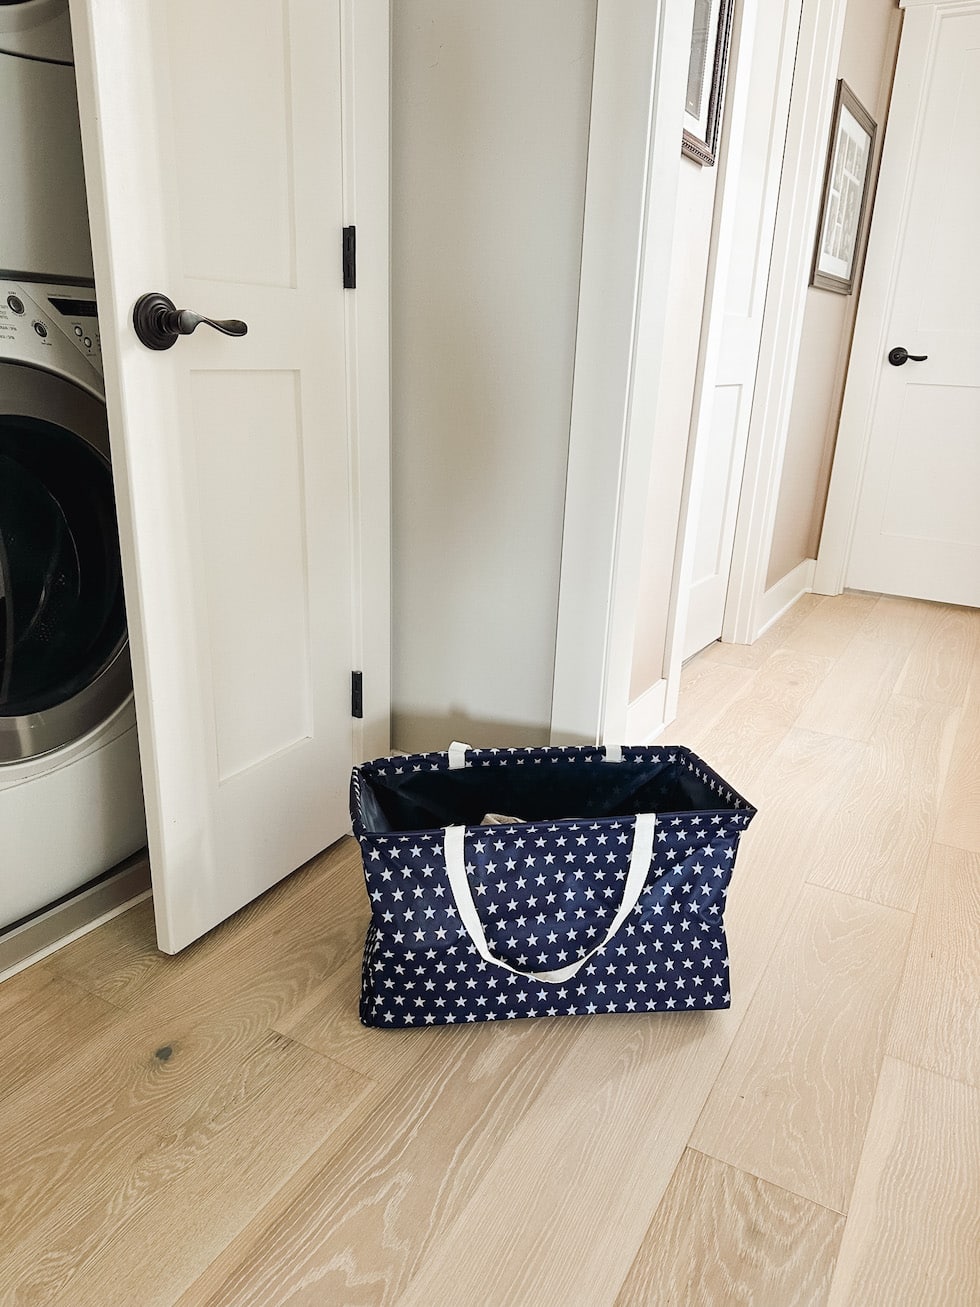 Small Space Hacks: Collapsible Laundry Bags (7 Ways They Can Simplify Your Life)